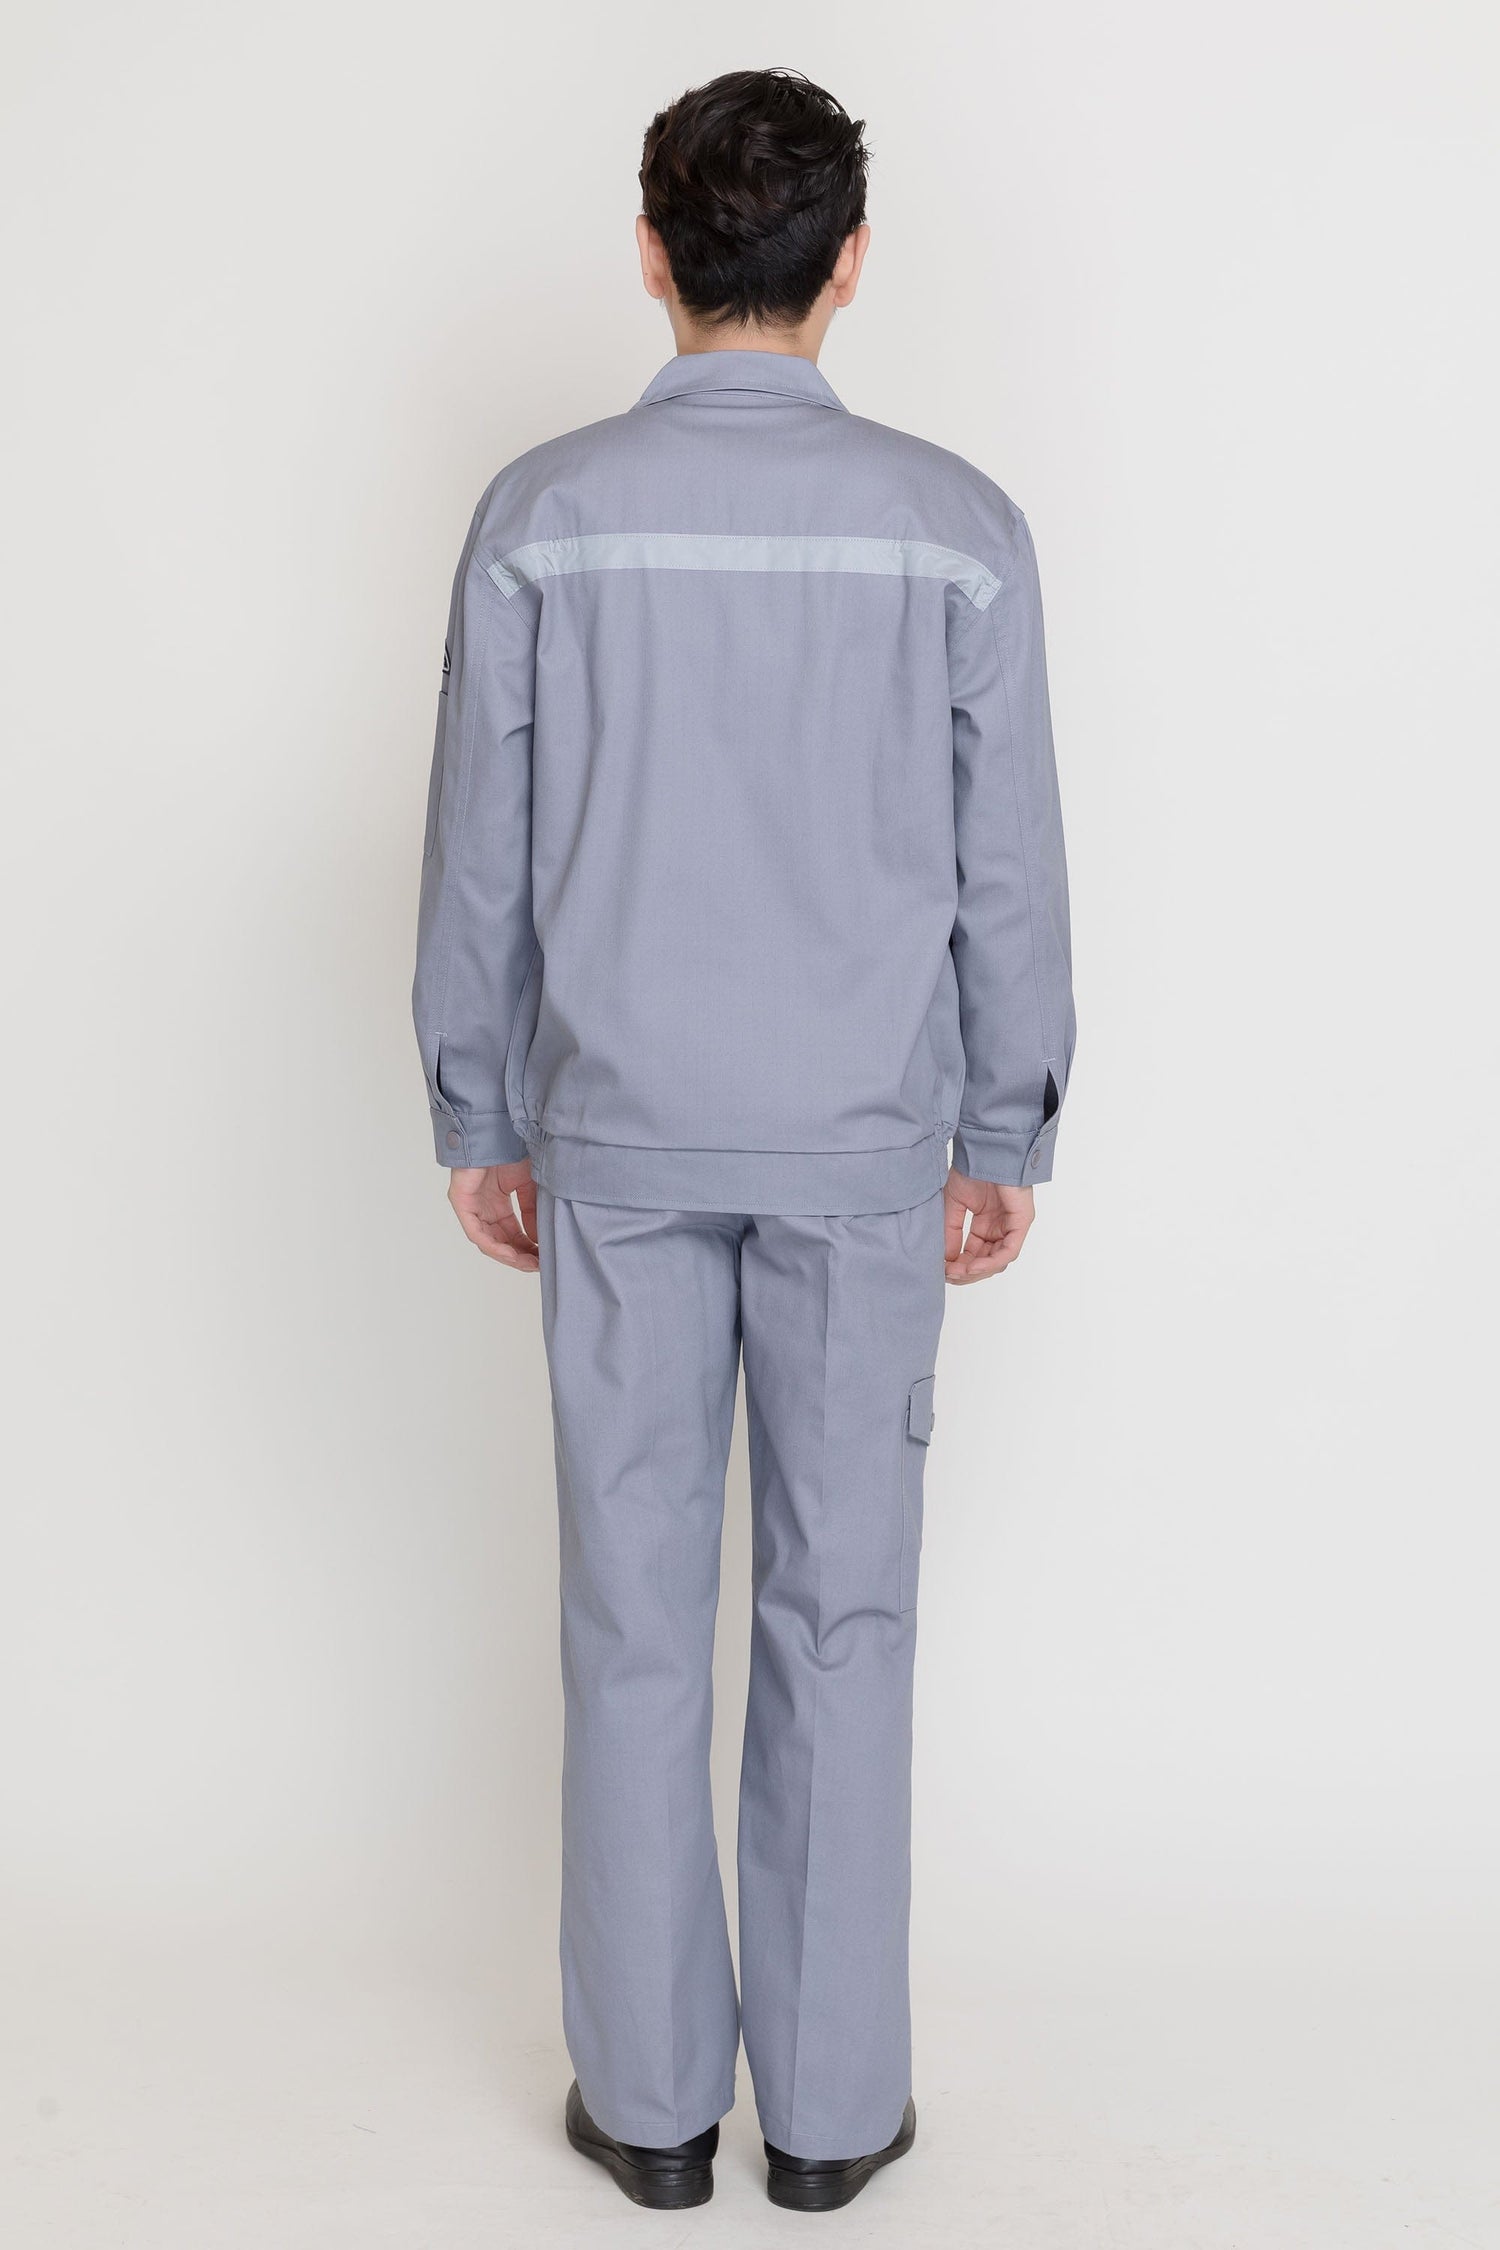 Corals Trading Co. 可樂思百貨商行 涤棉抗静电 Spring and Autumn style long-sleeved anti-static work clothes series SD-AS-W501